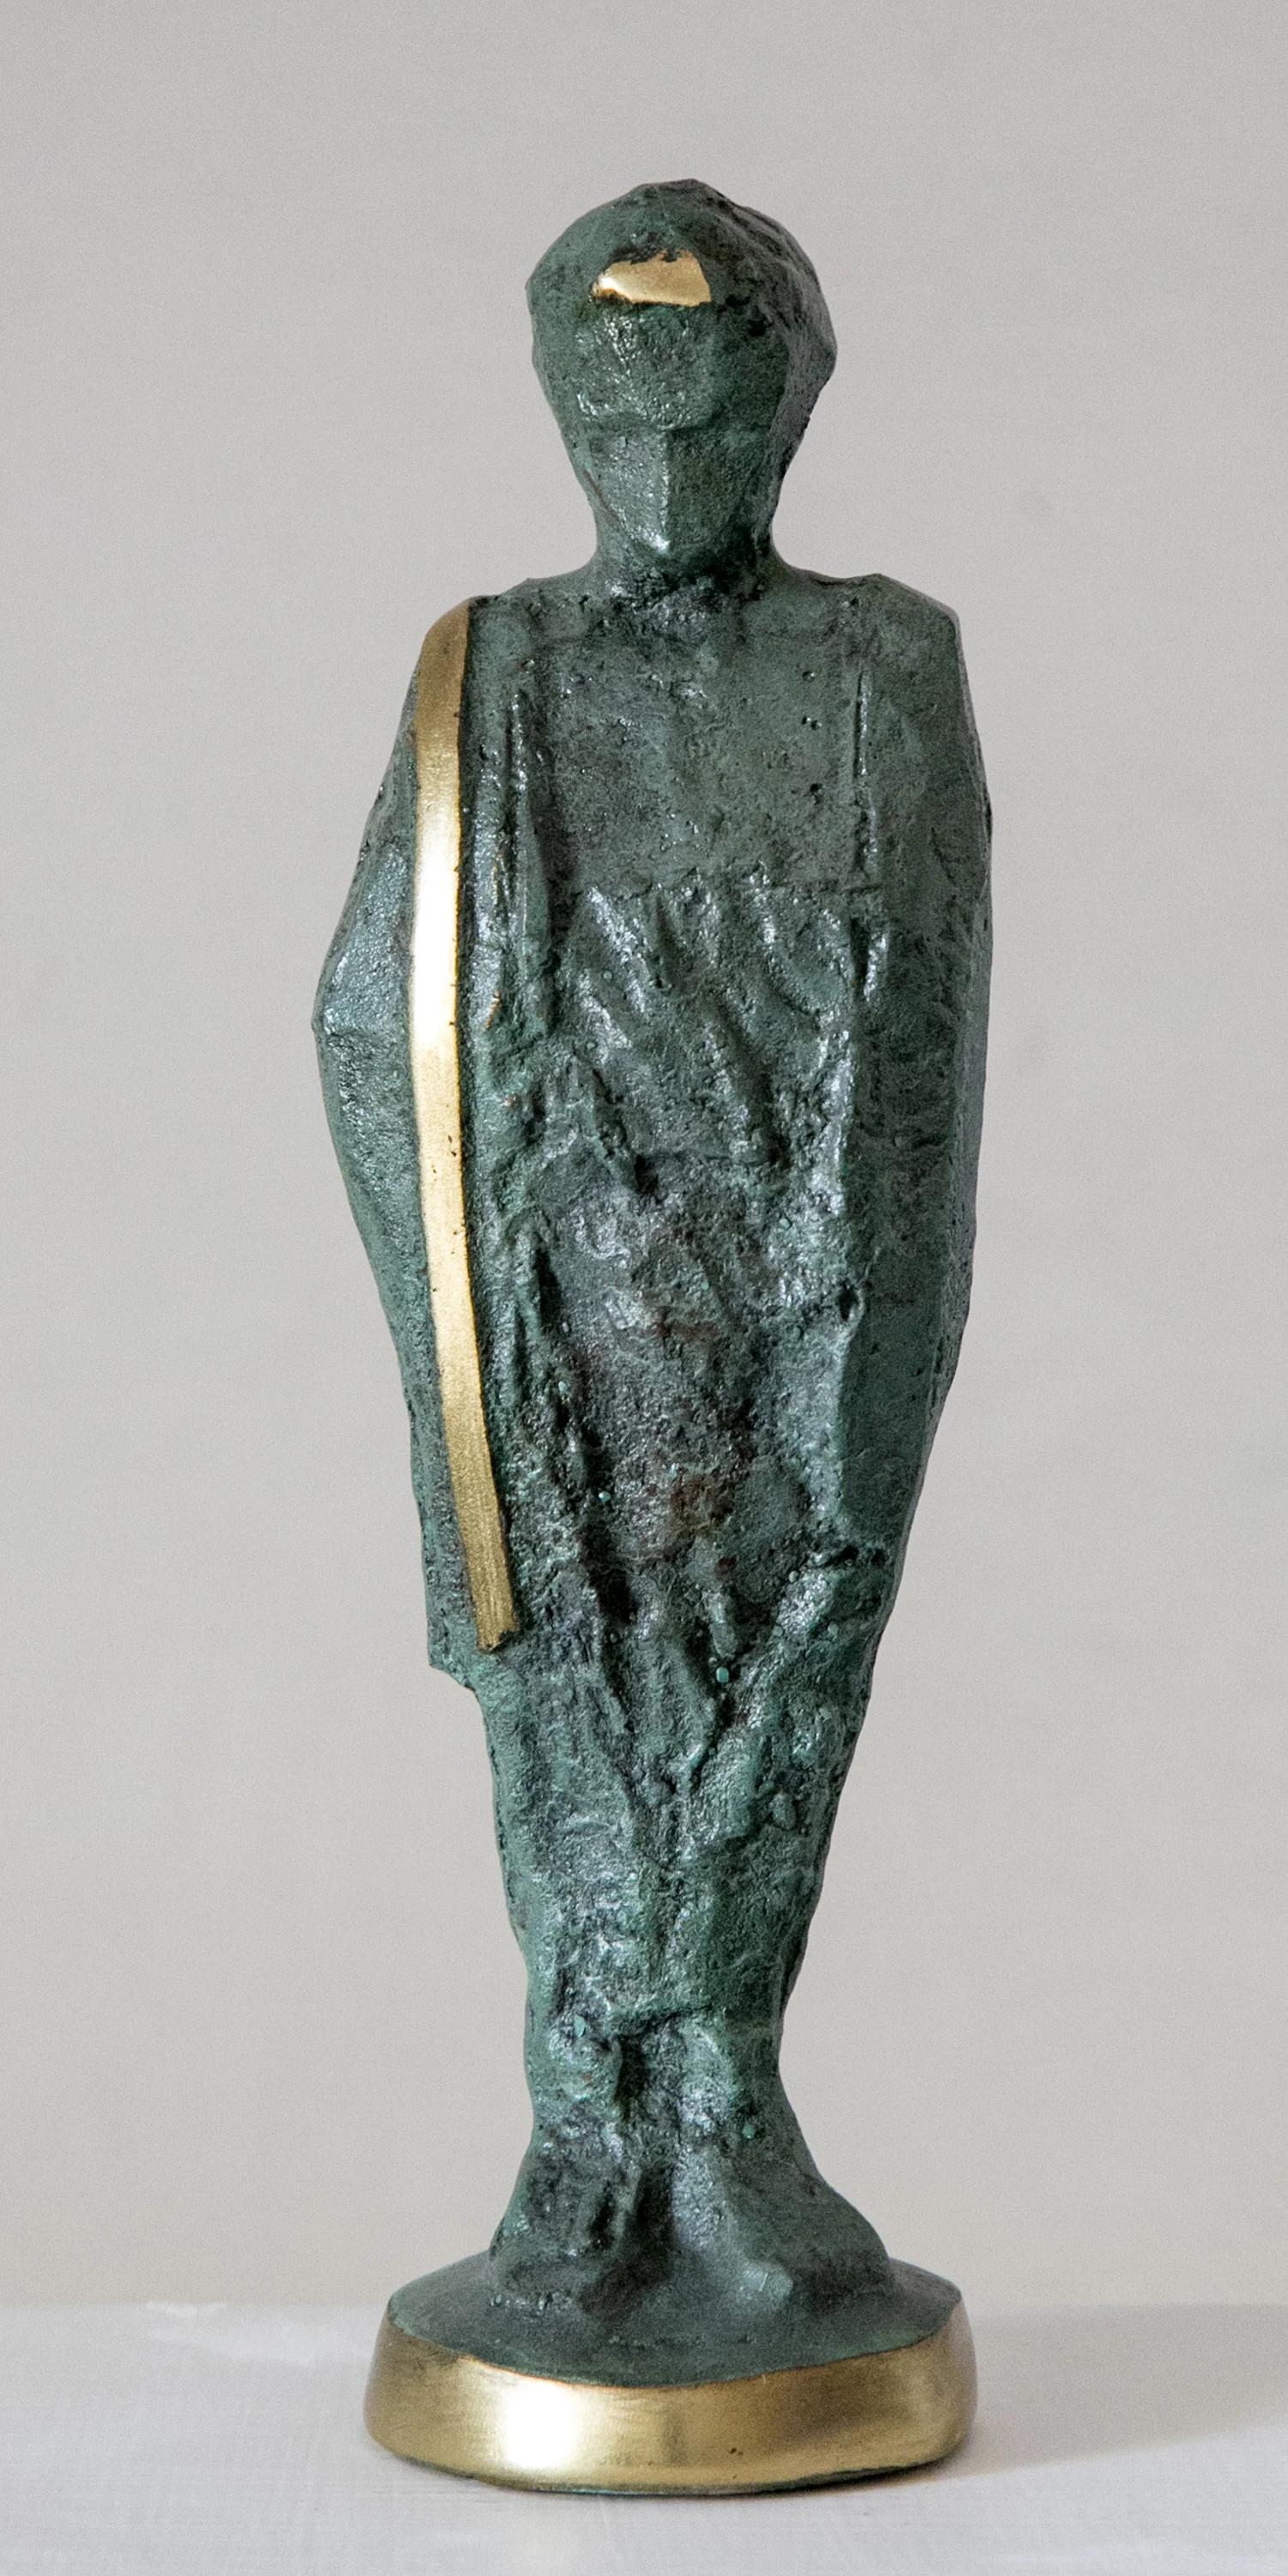 "Minister" Bronze Sculpture 12" x 3" x 2" inch by Sarkis Tossonian		

Sarkis Tossoonian was born in Alexandria in 1953. He graduated from the Faculty of Fine Arts/Sculpture in 1979. He started exhibiting in individual and group exhibitions in